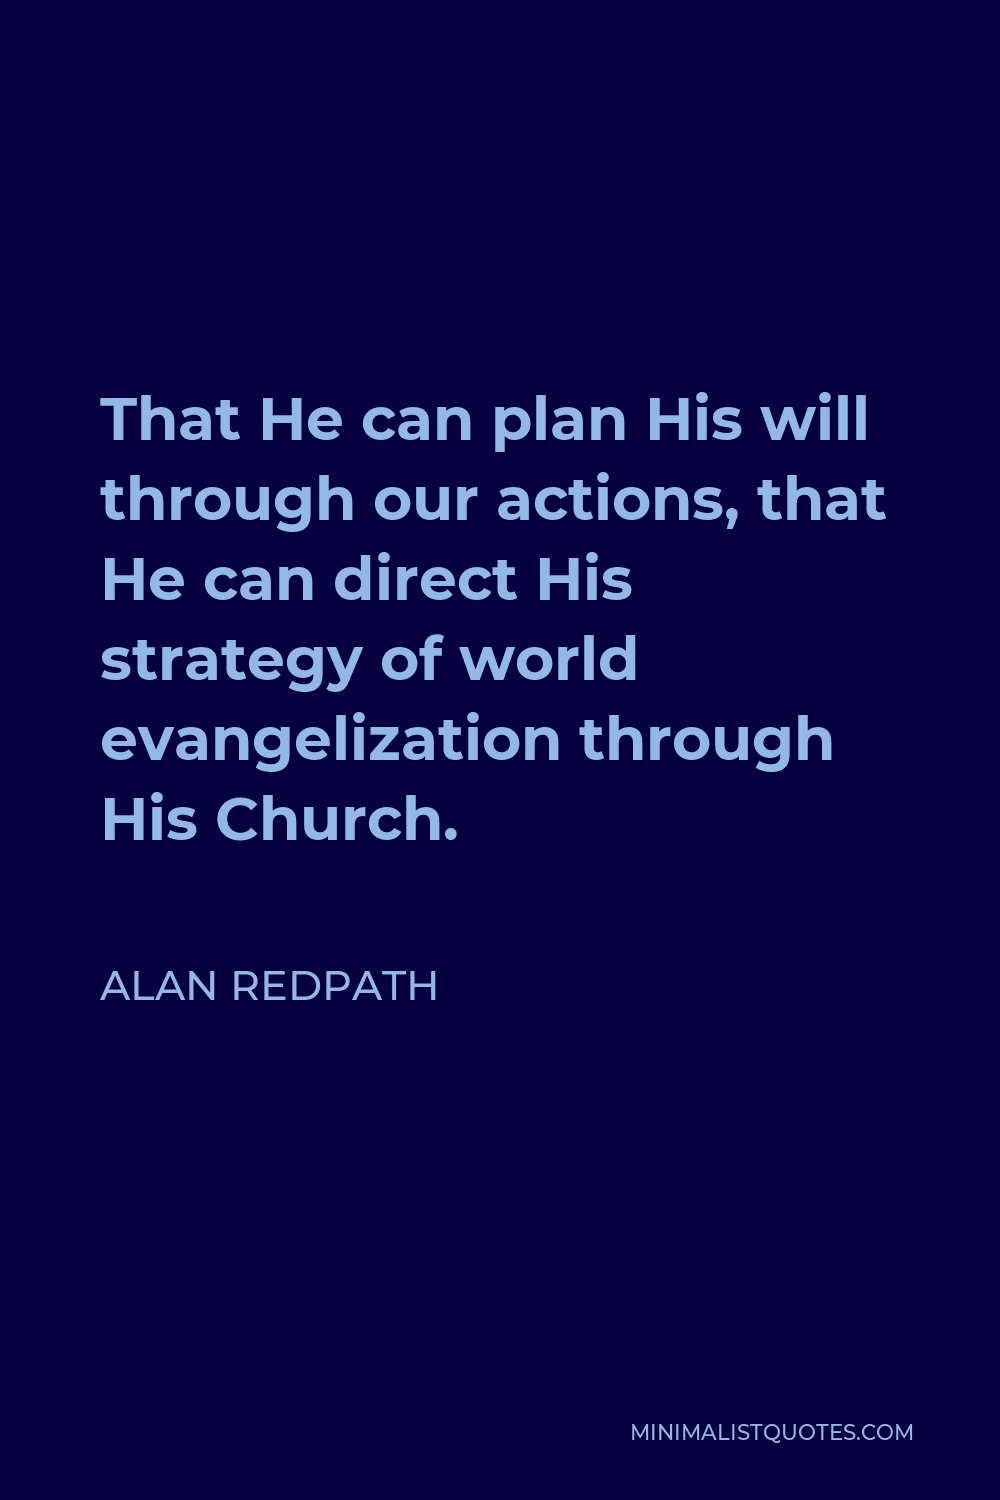 Alan Redpath Quote - That He can plan His will through our actions, that He can direct His strategy of world evangelization through His Church.